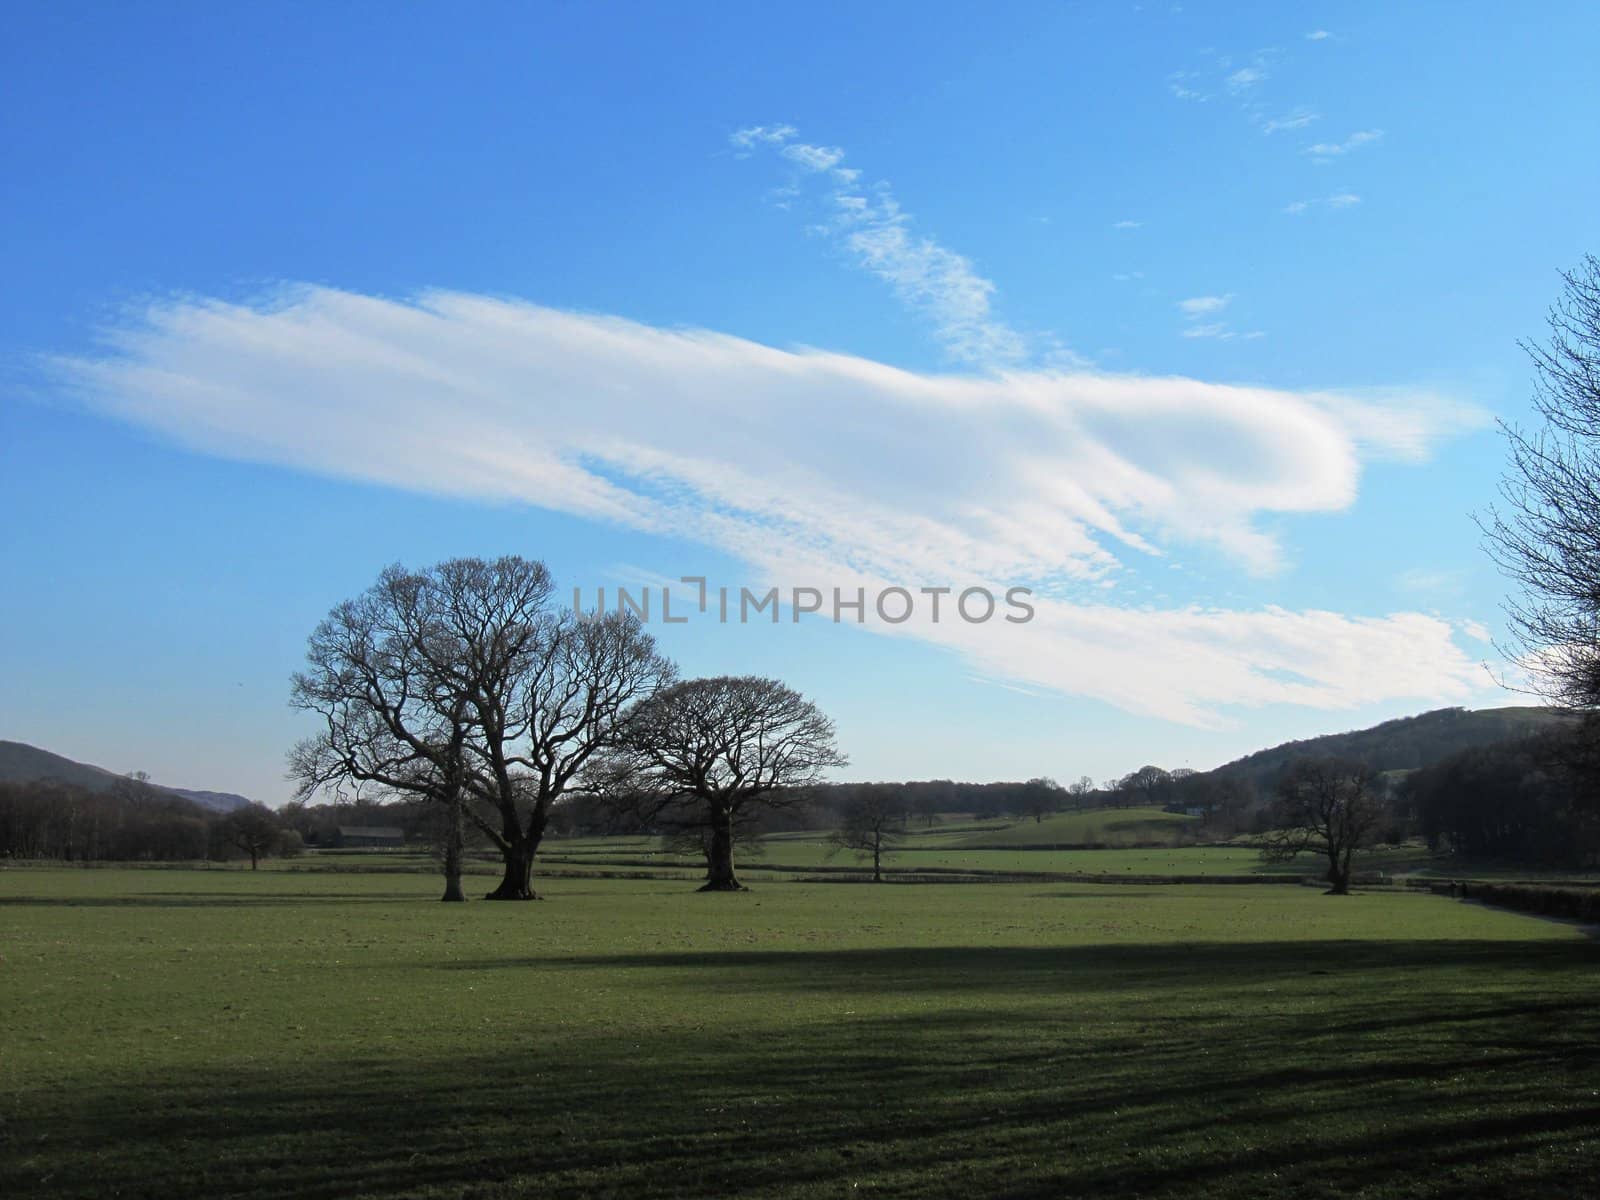 Clouds in an otherwise blue sky over trees in a field